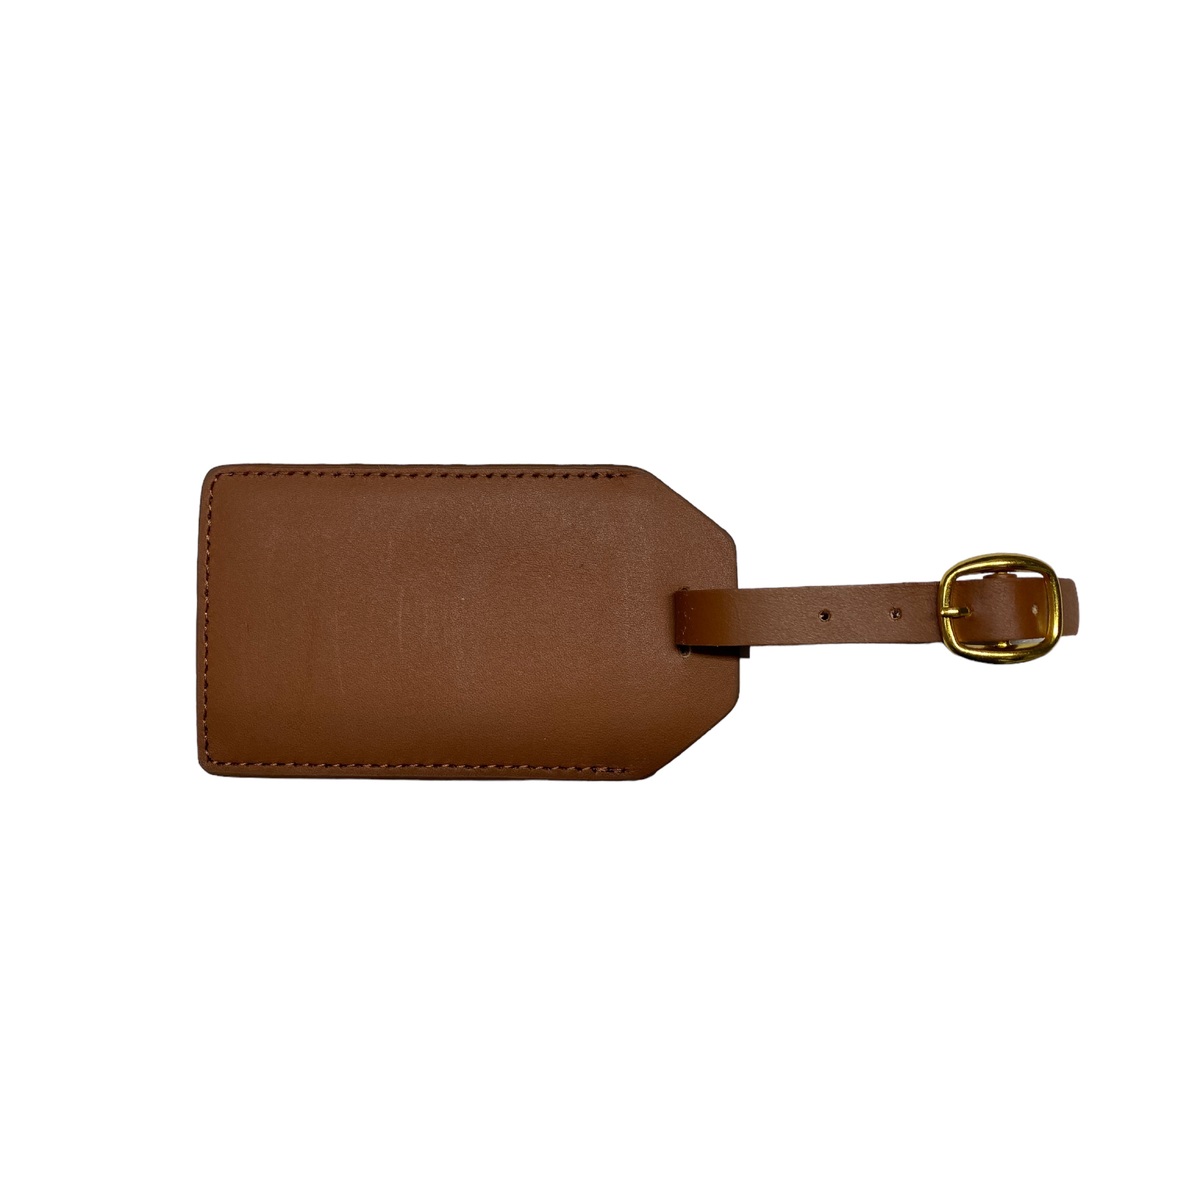 AC9095 Cow leather luggage tag